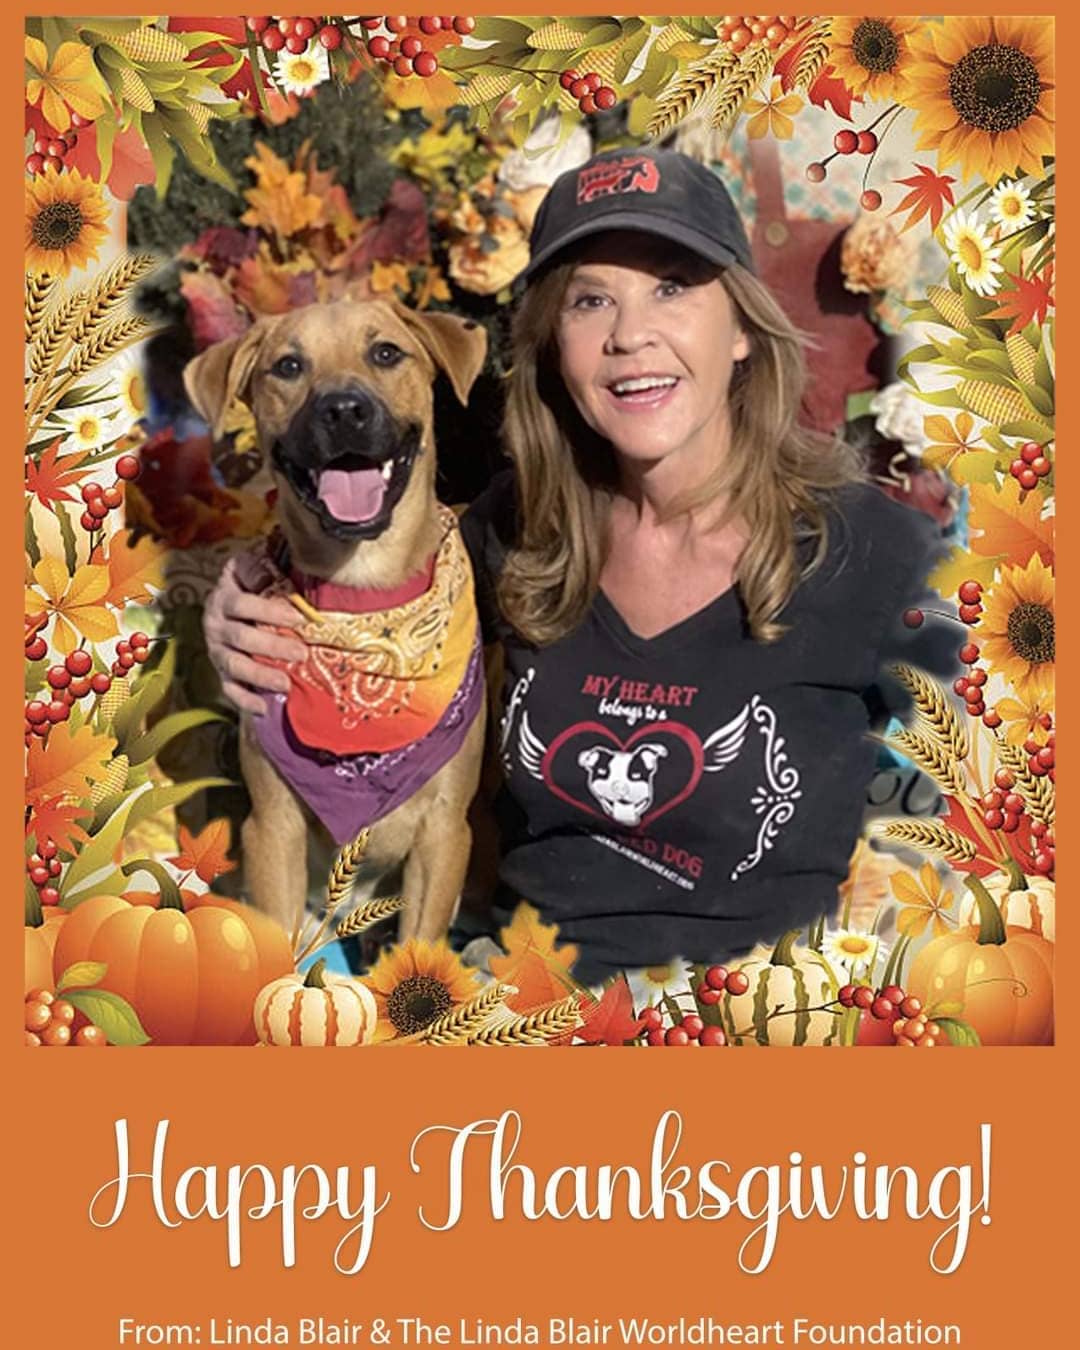 Wishing you all a very Happy & Safe Thanksgiving!

Thank you all for your support and helping us to save so many lives. We are so grateful for all of you! 

Love,
Linda Blair, the LBWF team and the rescued dogs